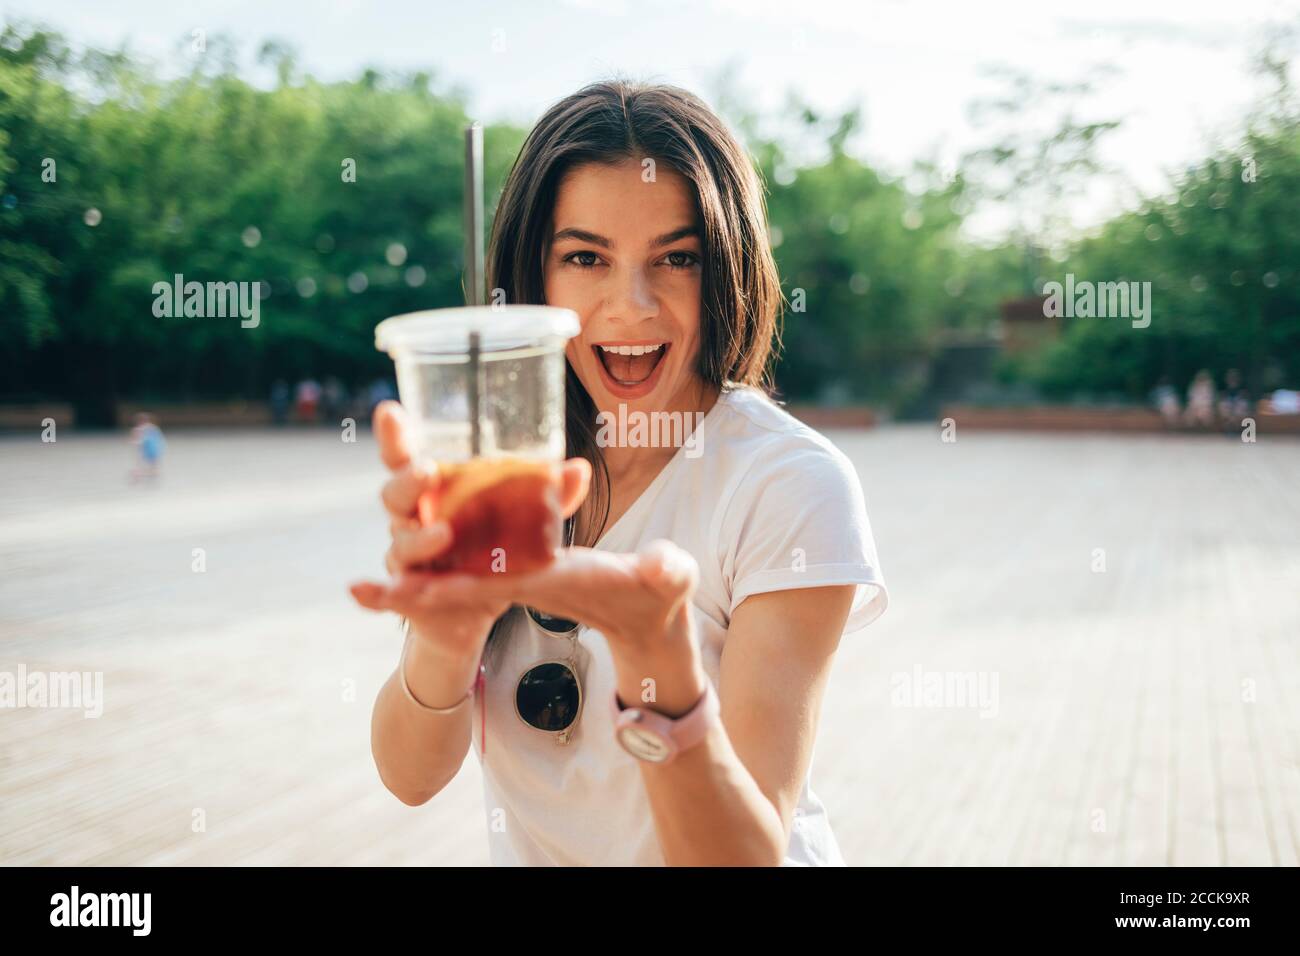 Cheerful young woman with mouth open holding soft drink cup while standing in park Stock Photo